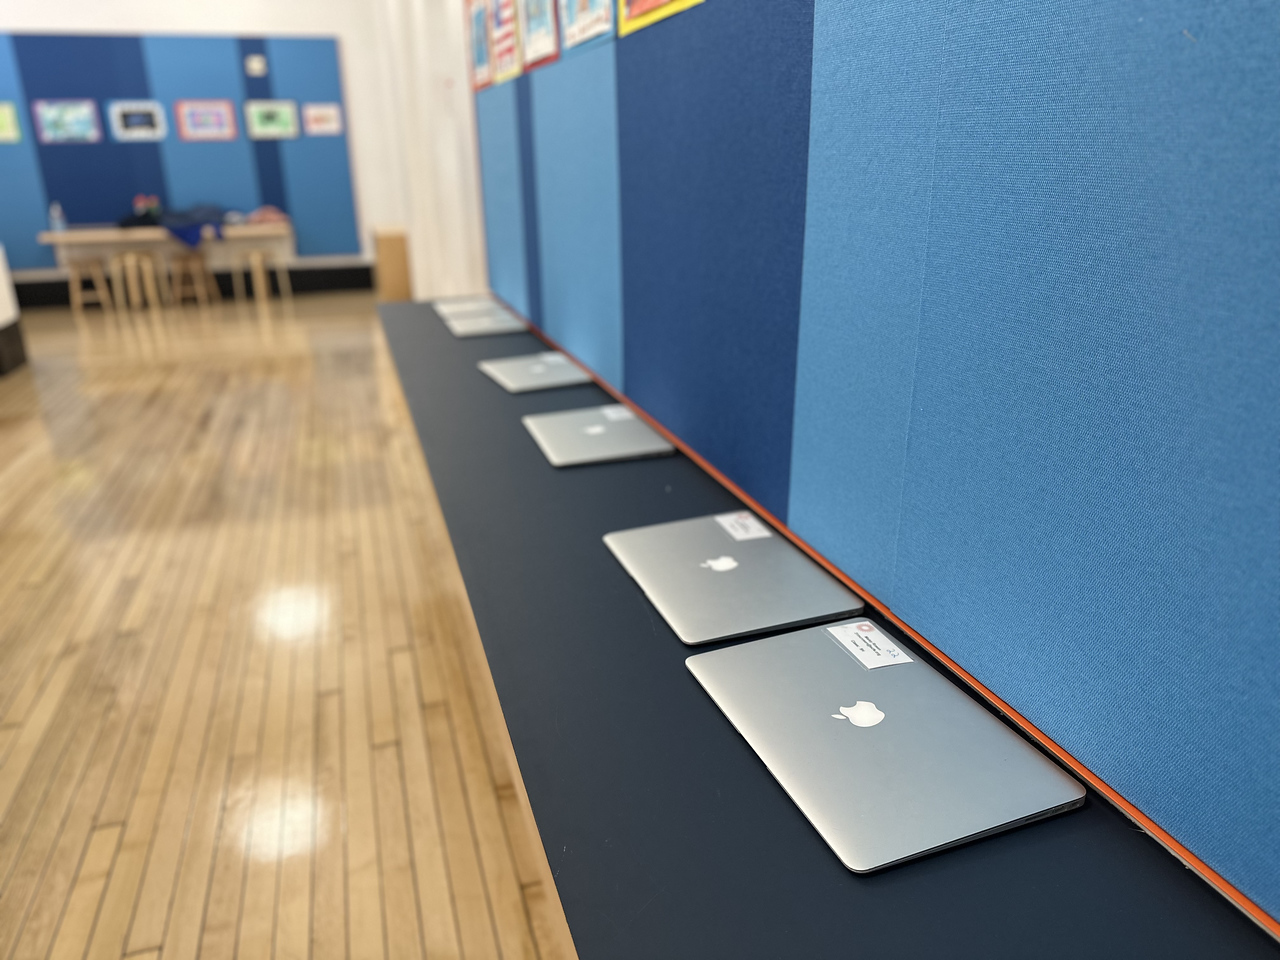 Computers sit in a row in Ethical Culture hallway.